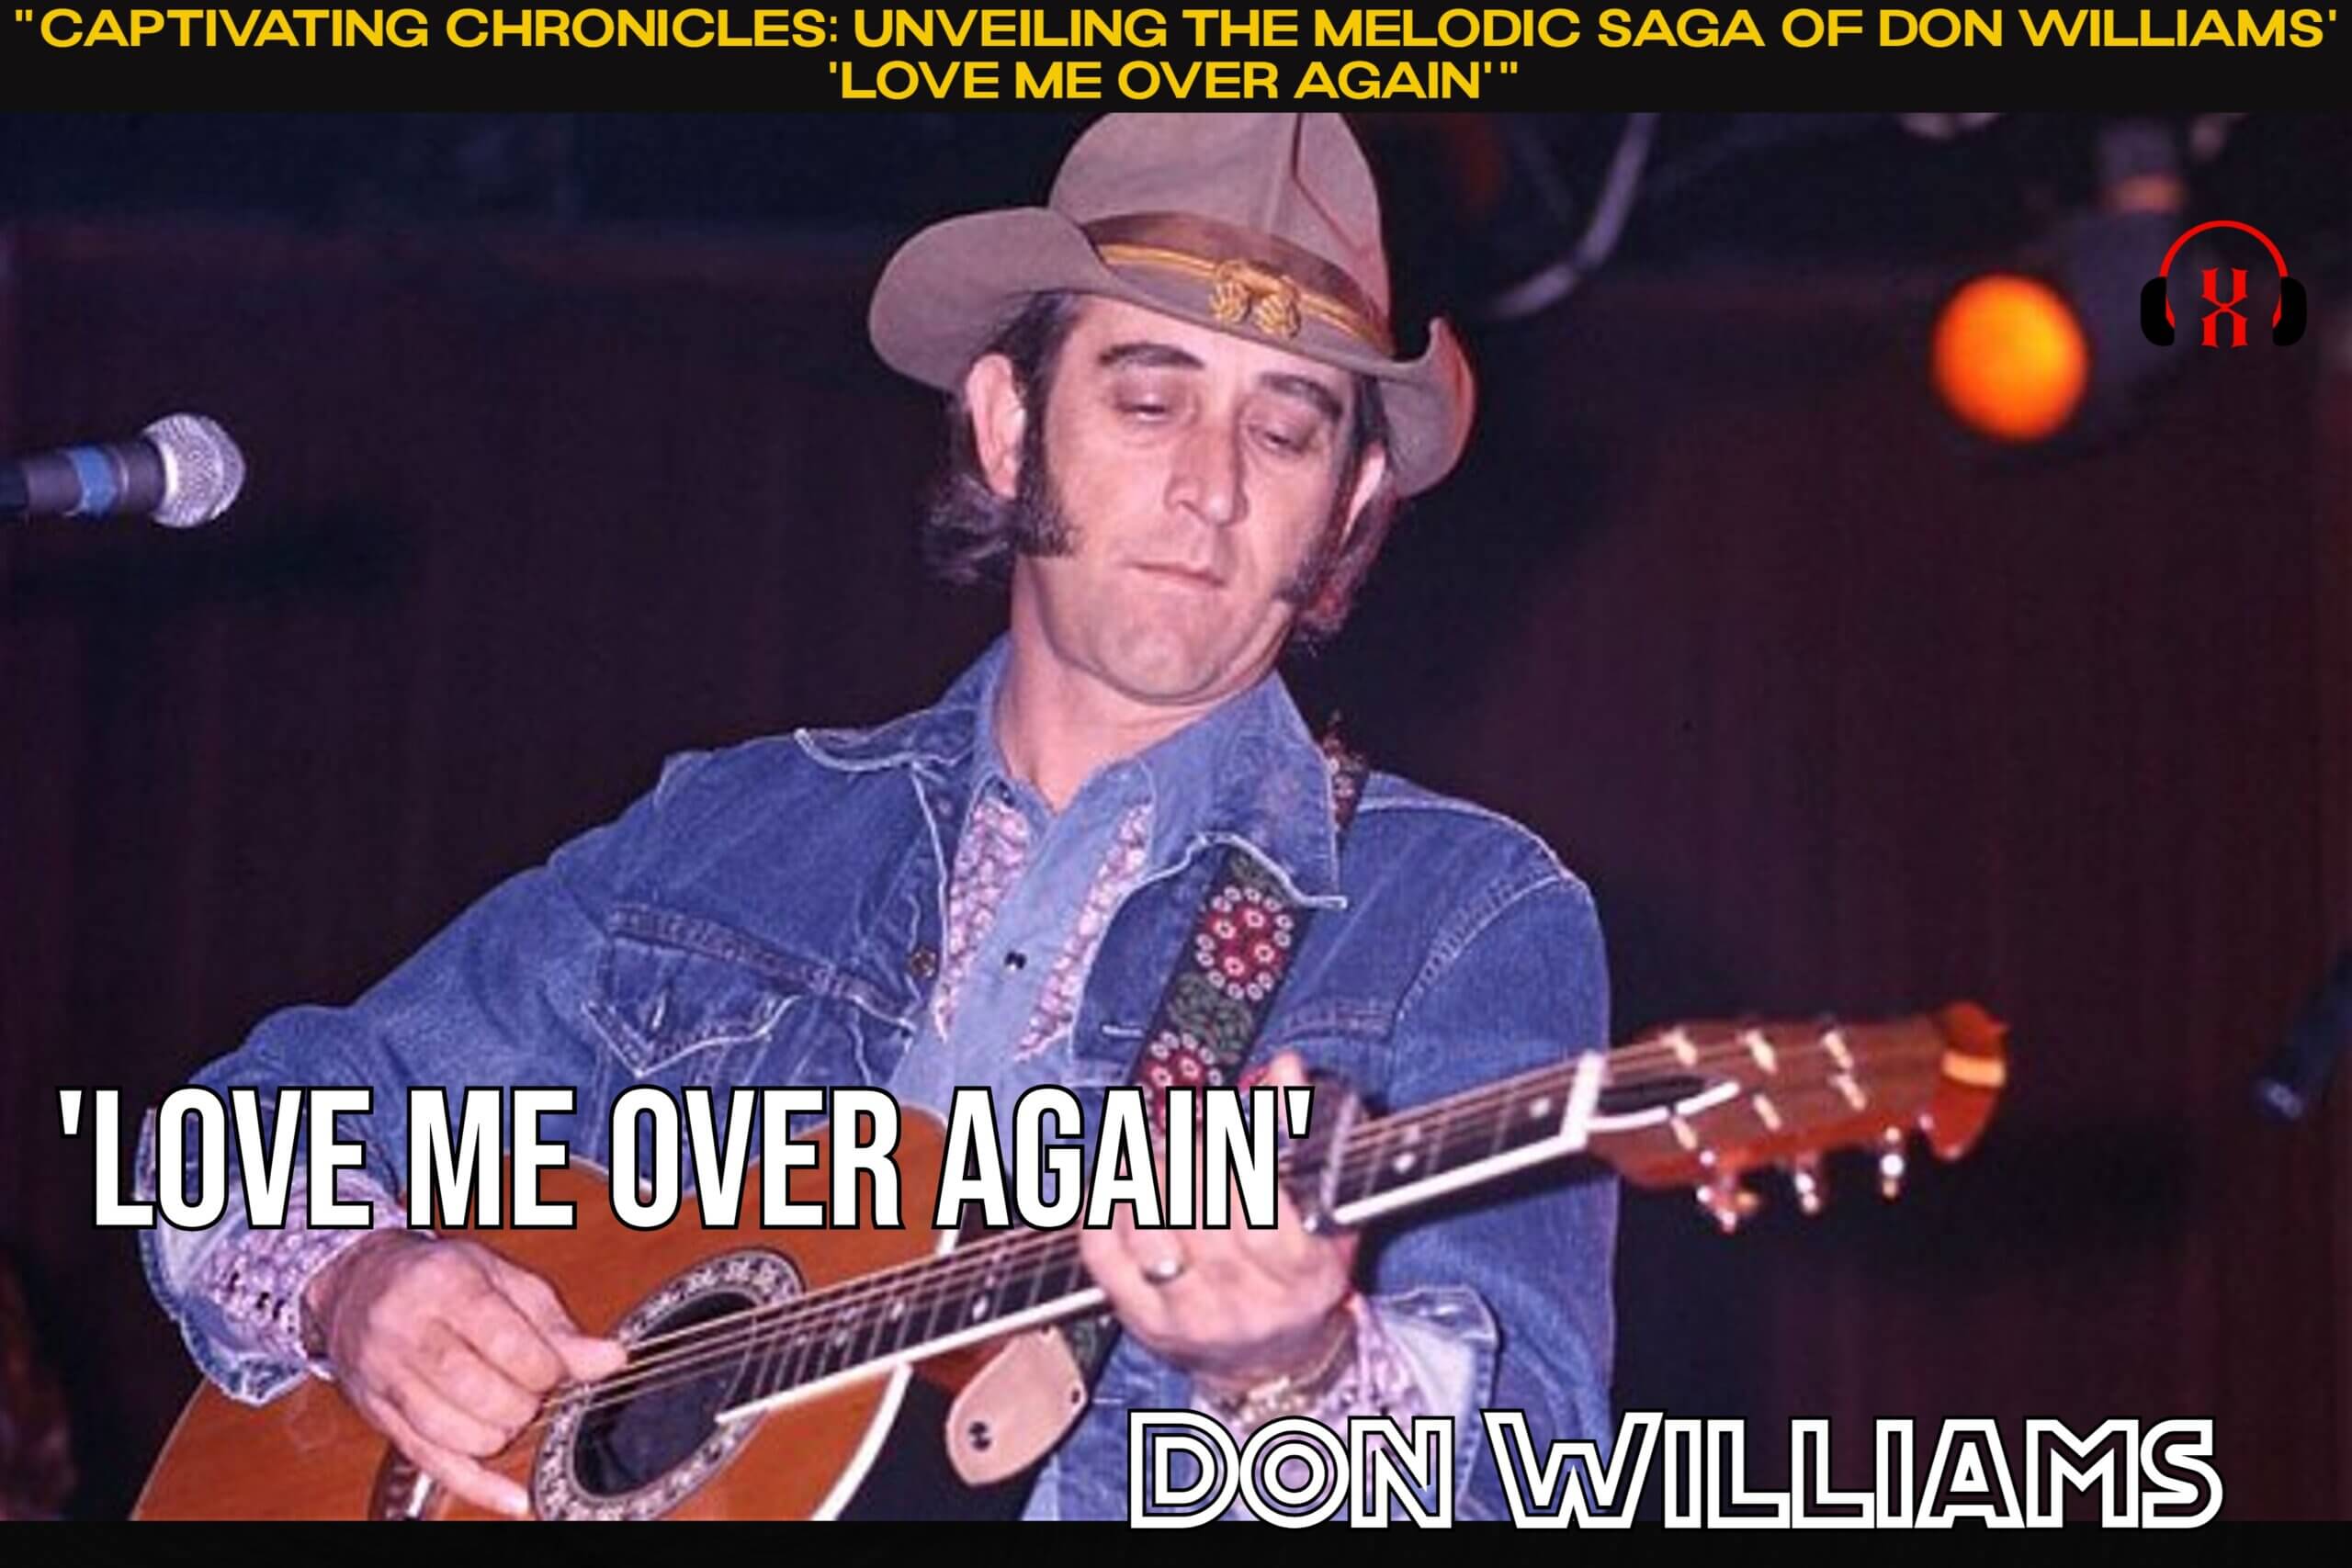 “Captivating Chronicles: Unveiling the Melodic Saga of Don Williams’ ‘Love Me Over Again'”